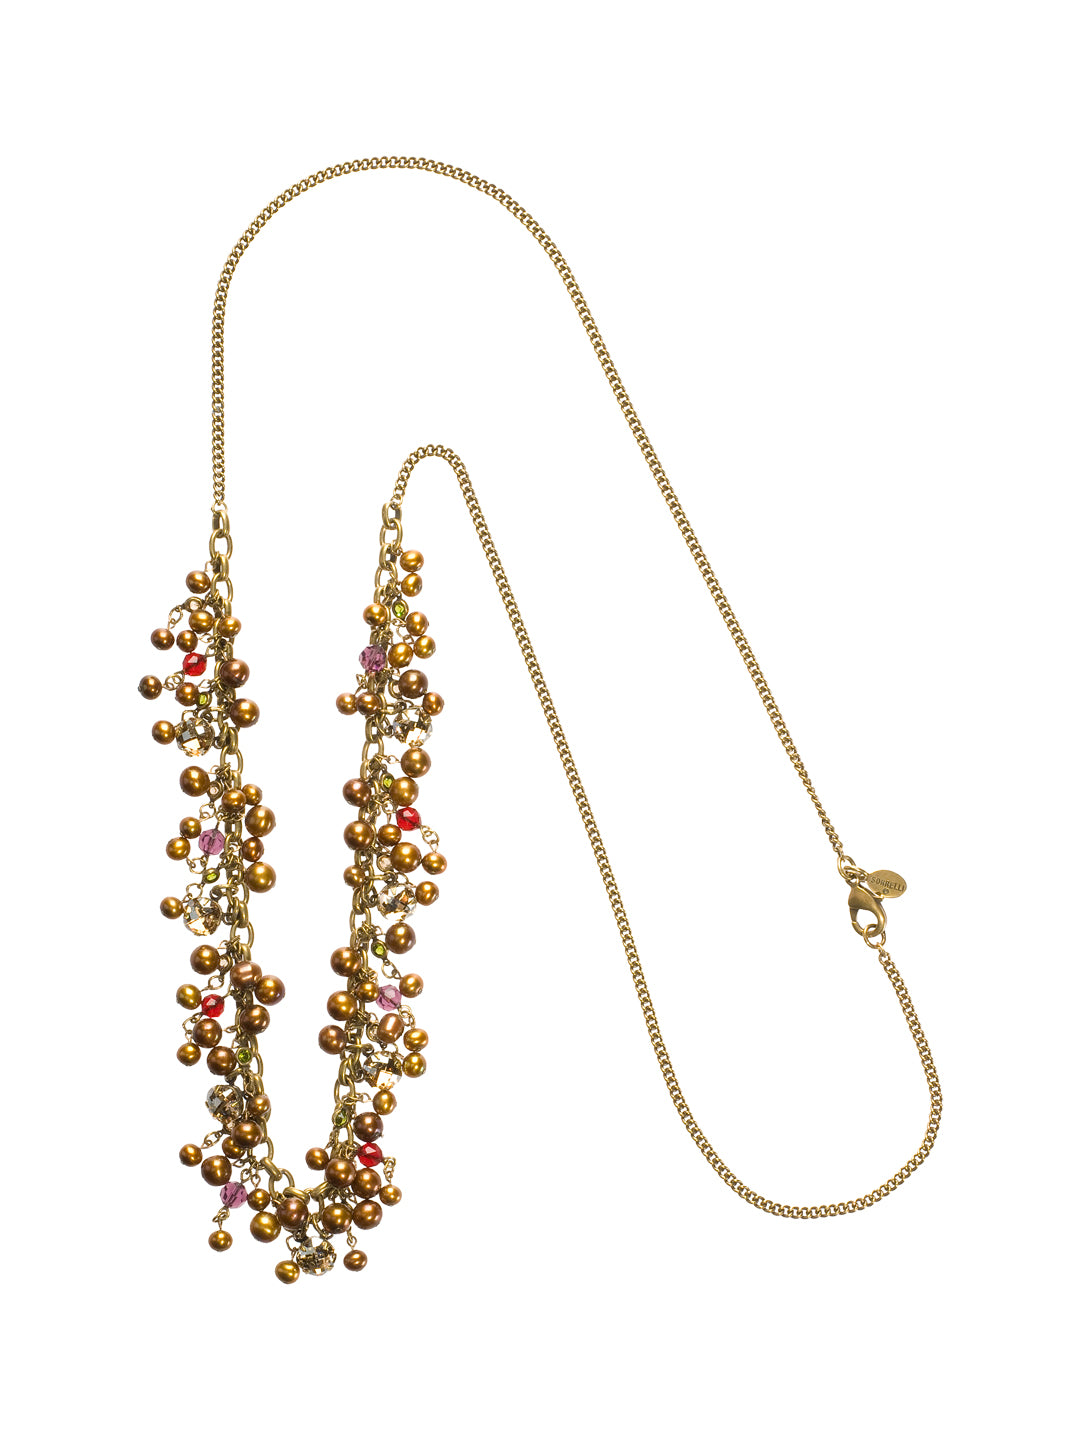 Clustered Crystal and Pearl Necklace - NCJ13AGTAP